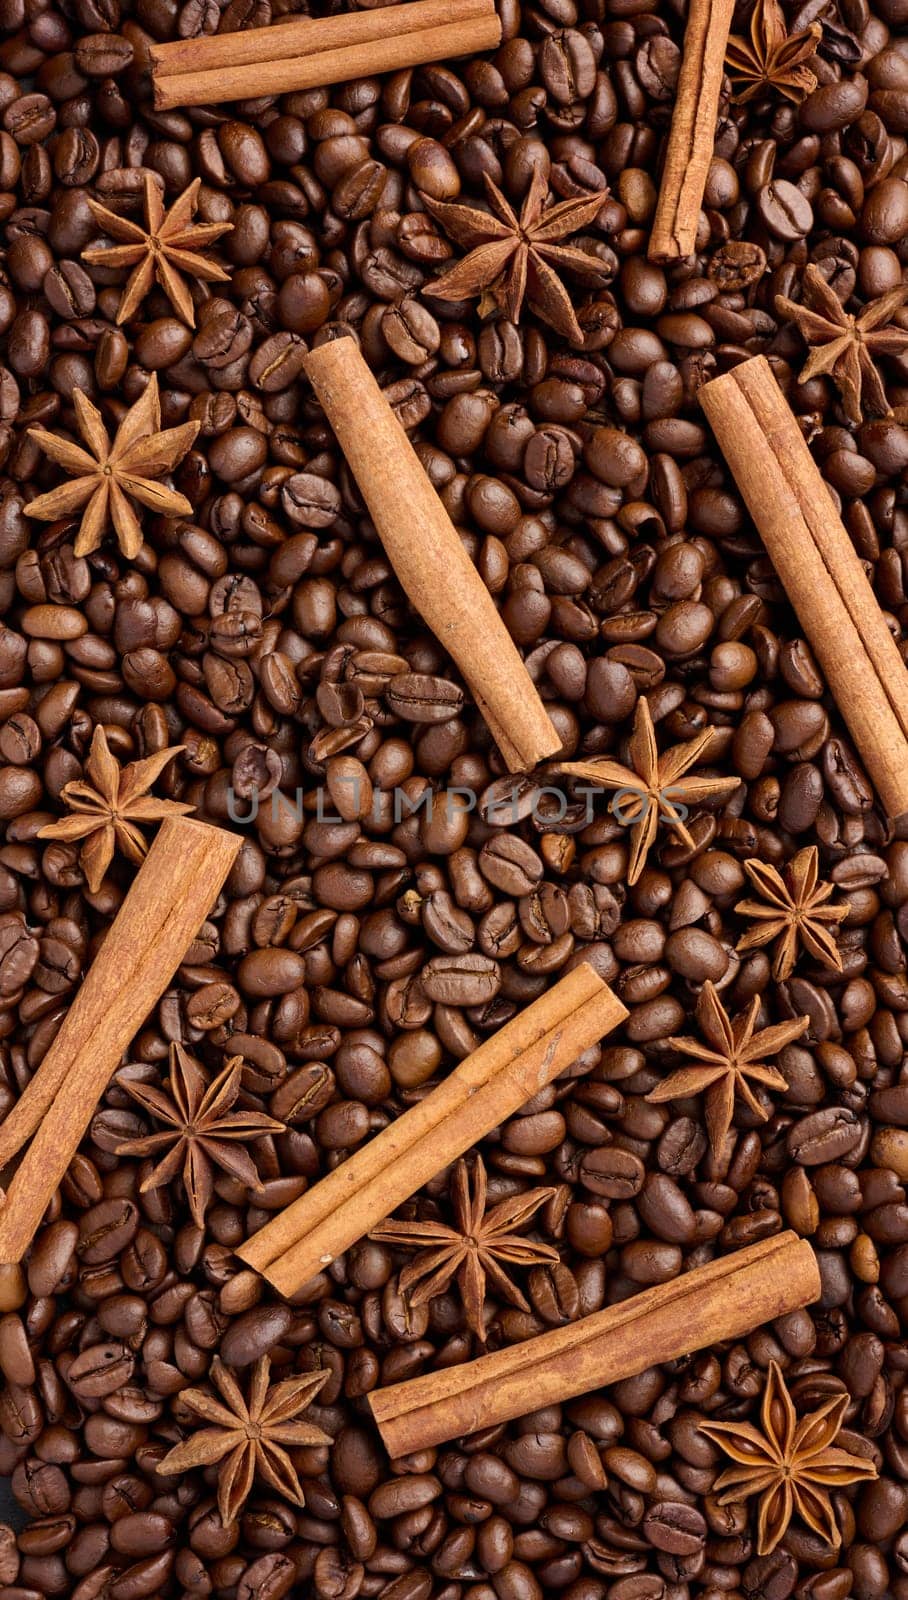 Roasted coffee beans, cinnamon sticks and star anise, full frame by ndanko